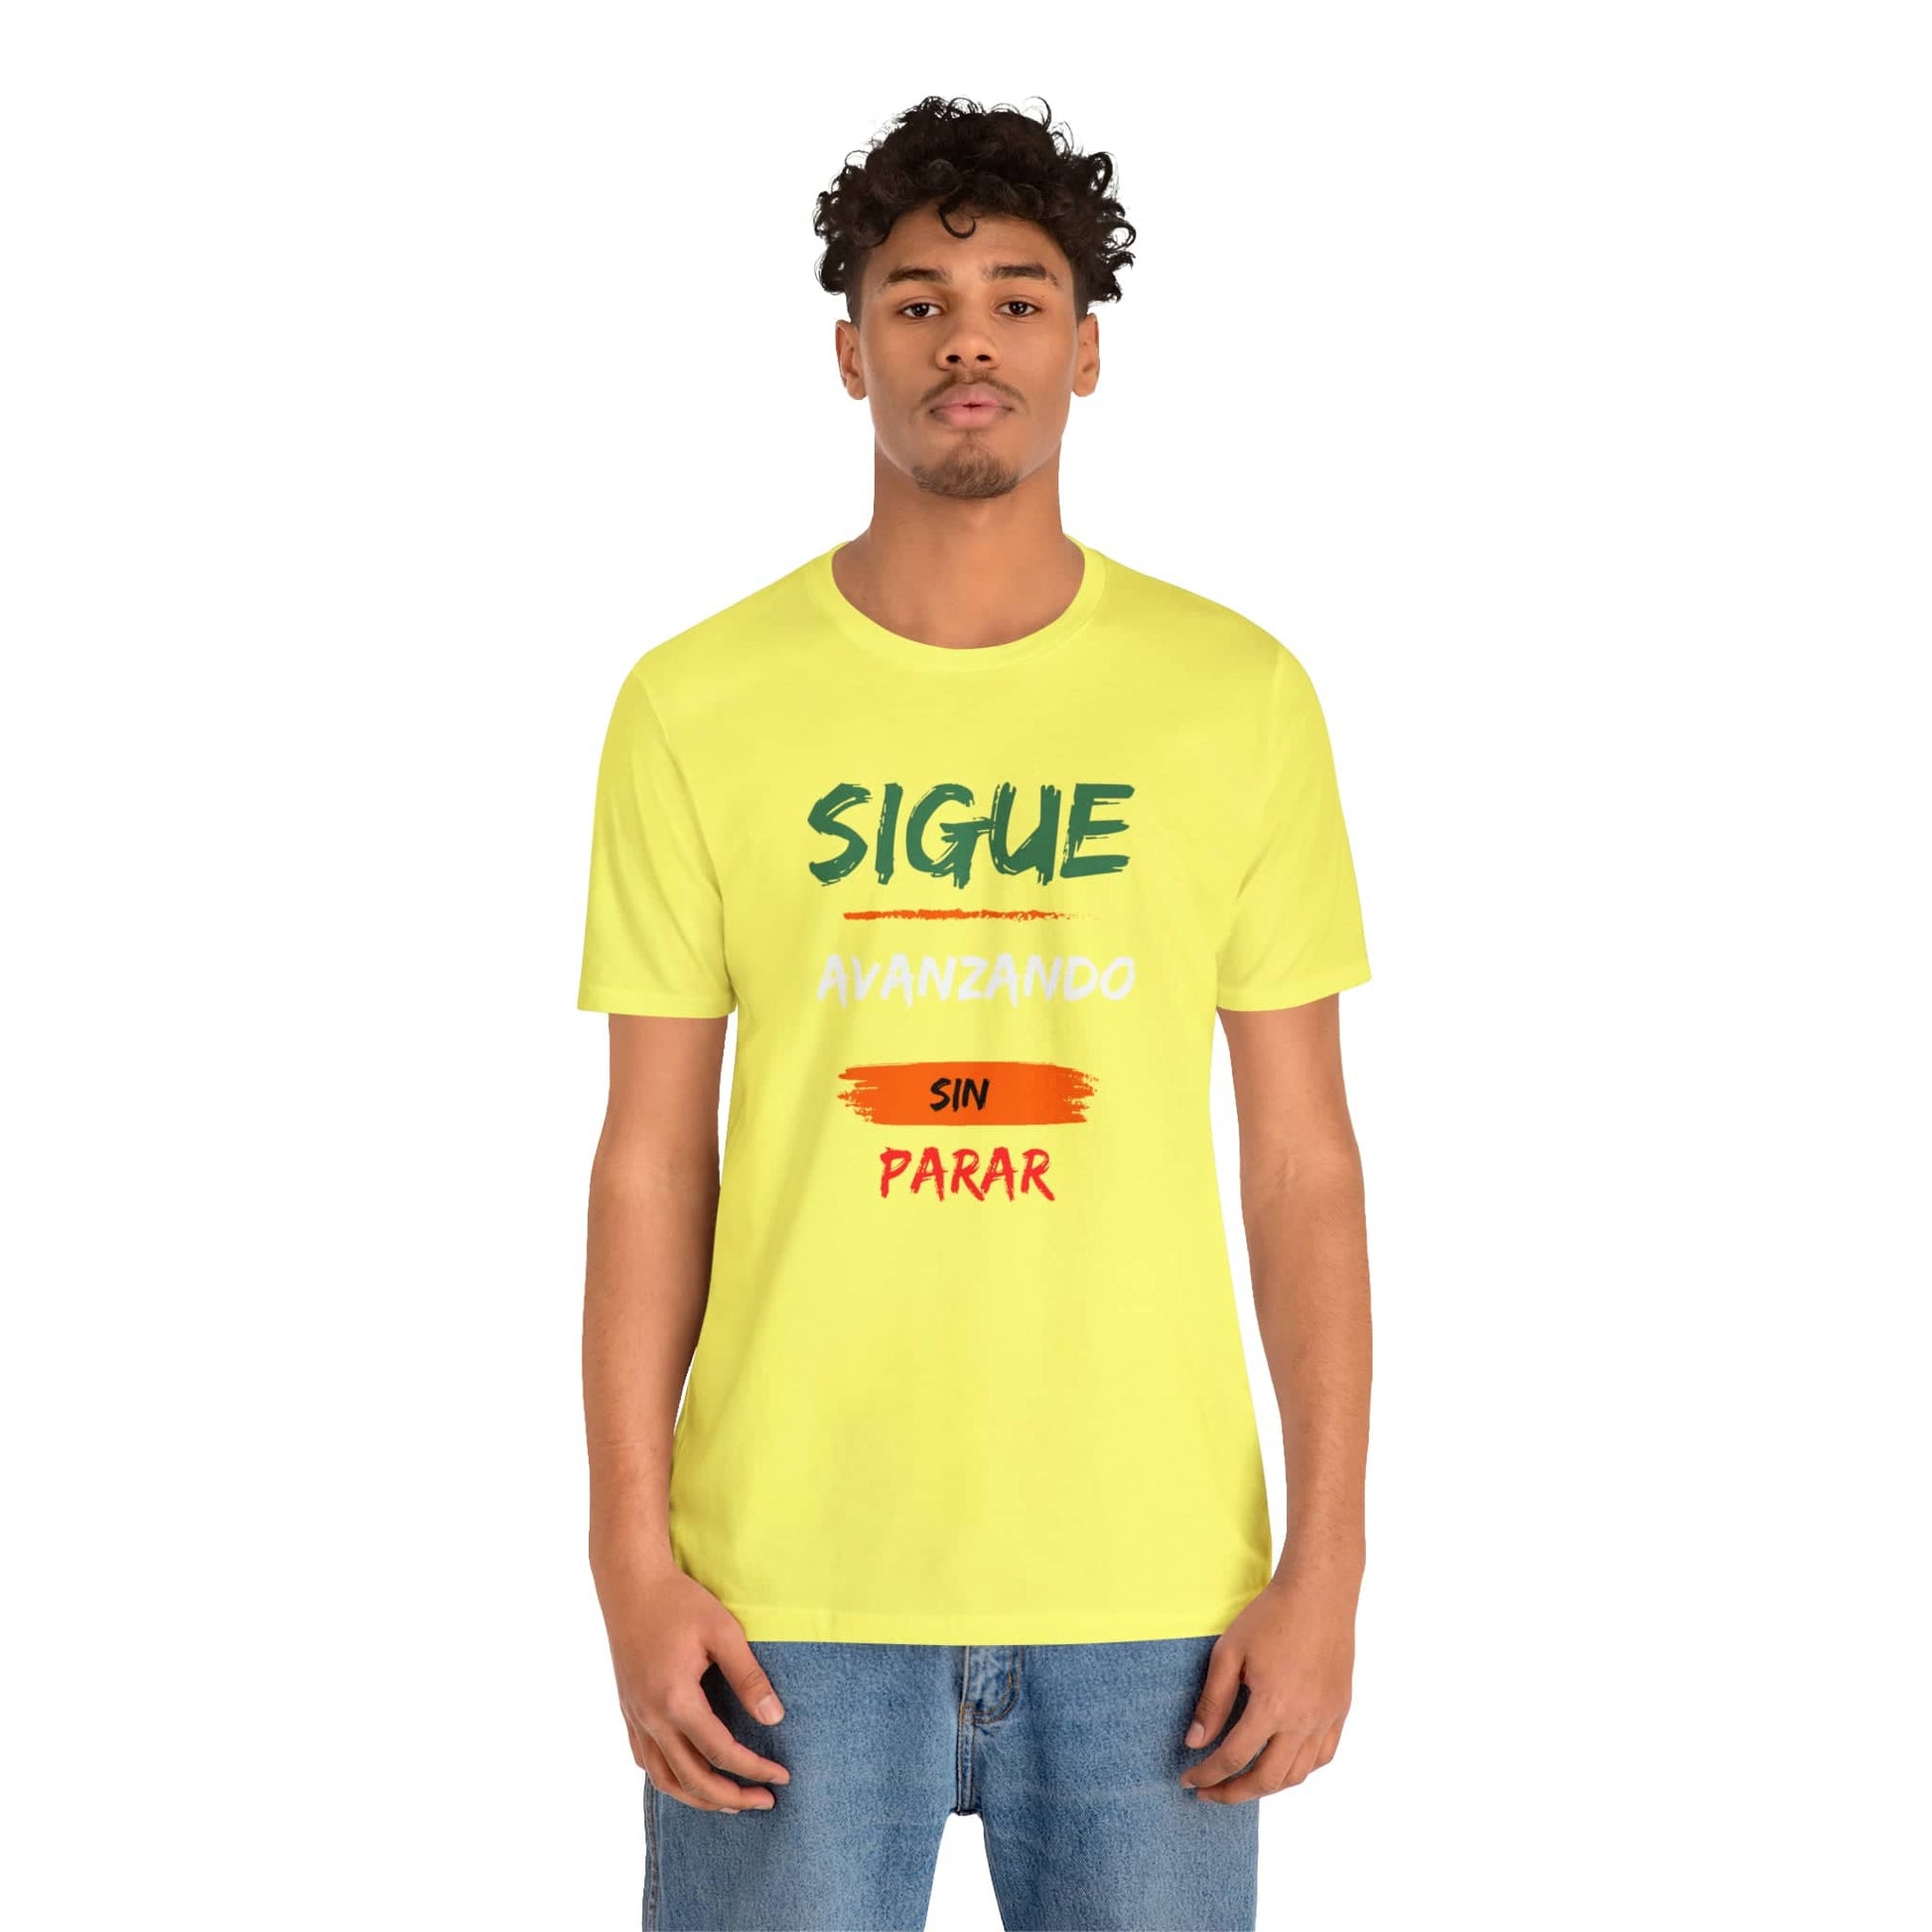 Sigue Avanzando Sin Parar: The Unisex Tee That Empowers You to Keep Going T-Shirt Bigger Than Life Yellow S 